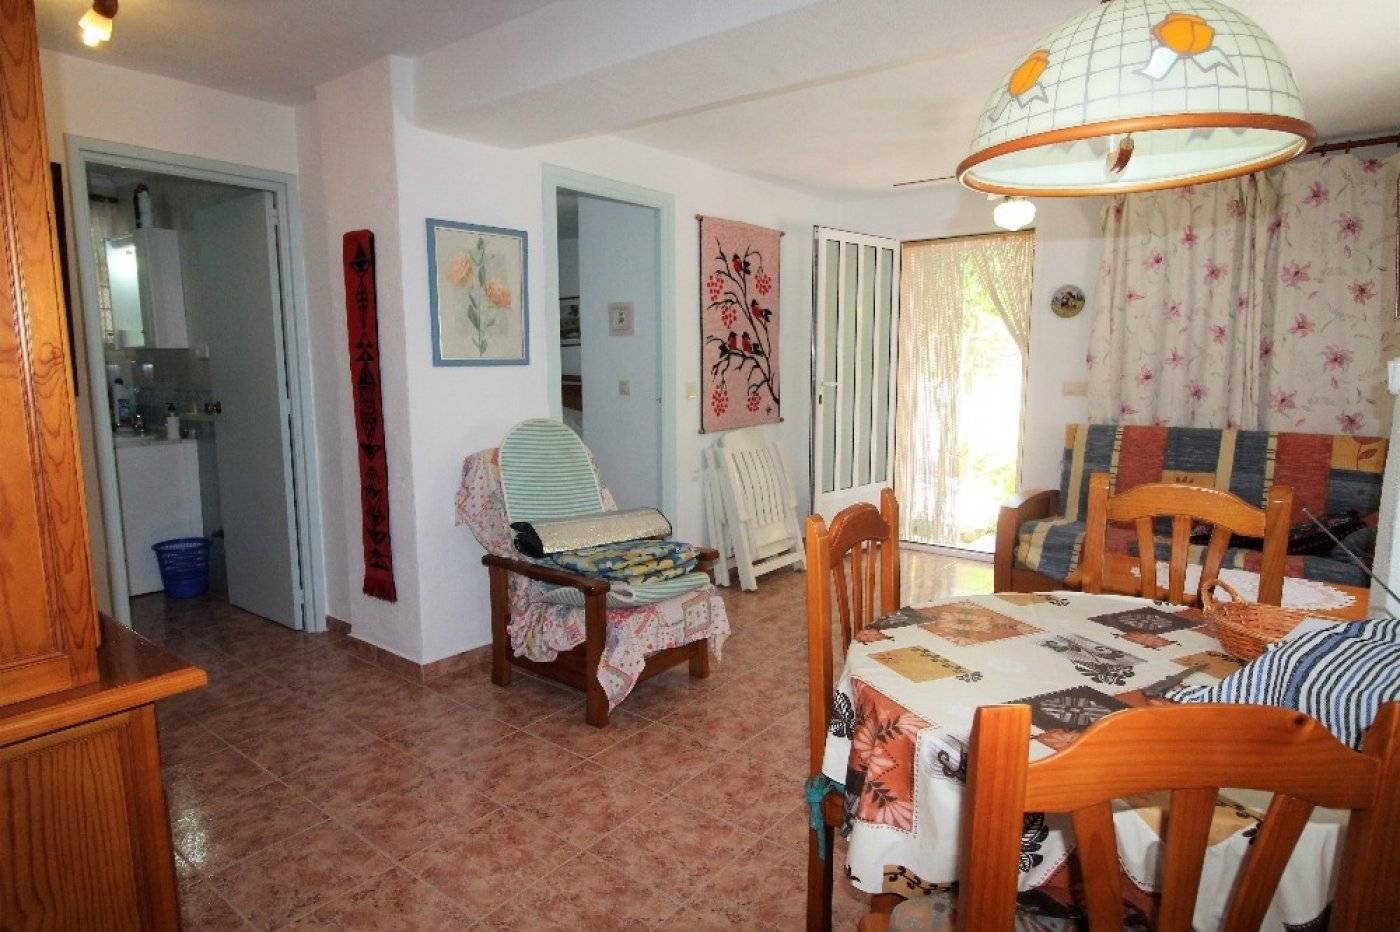 DETACHED VILLA WITH LARGE GARDEN AND OWN POOL ON THE BALCONIES